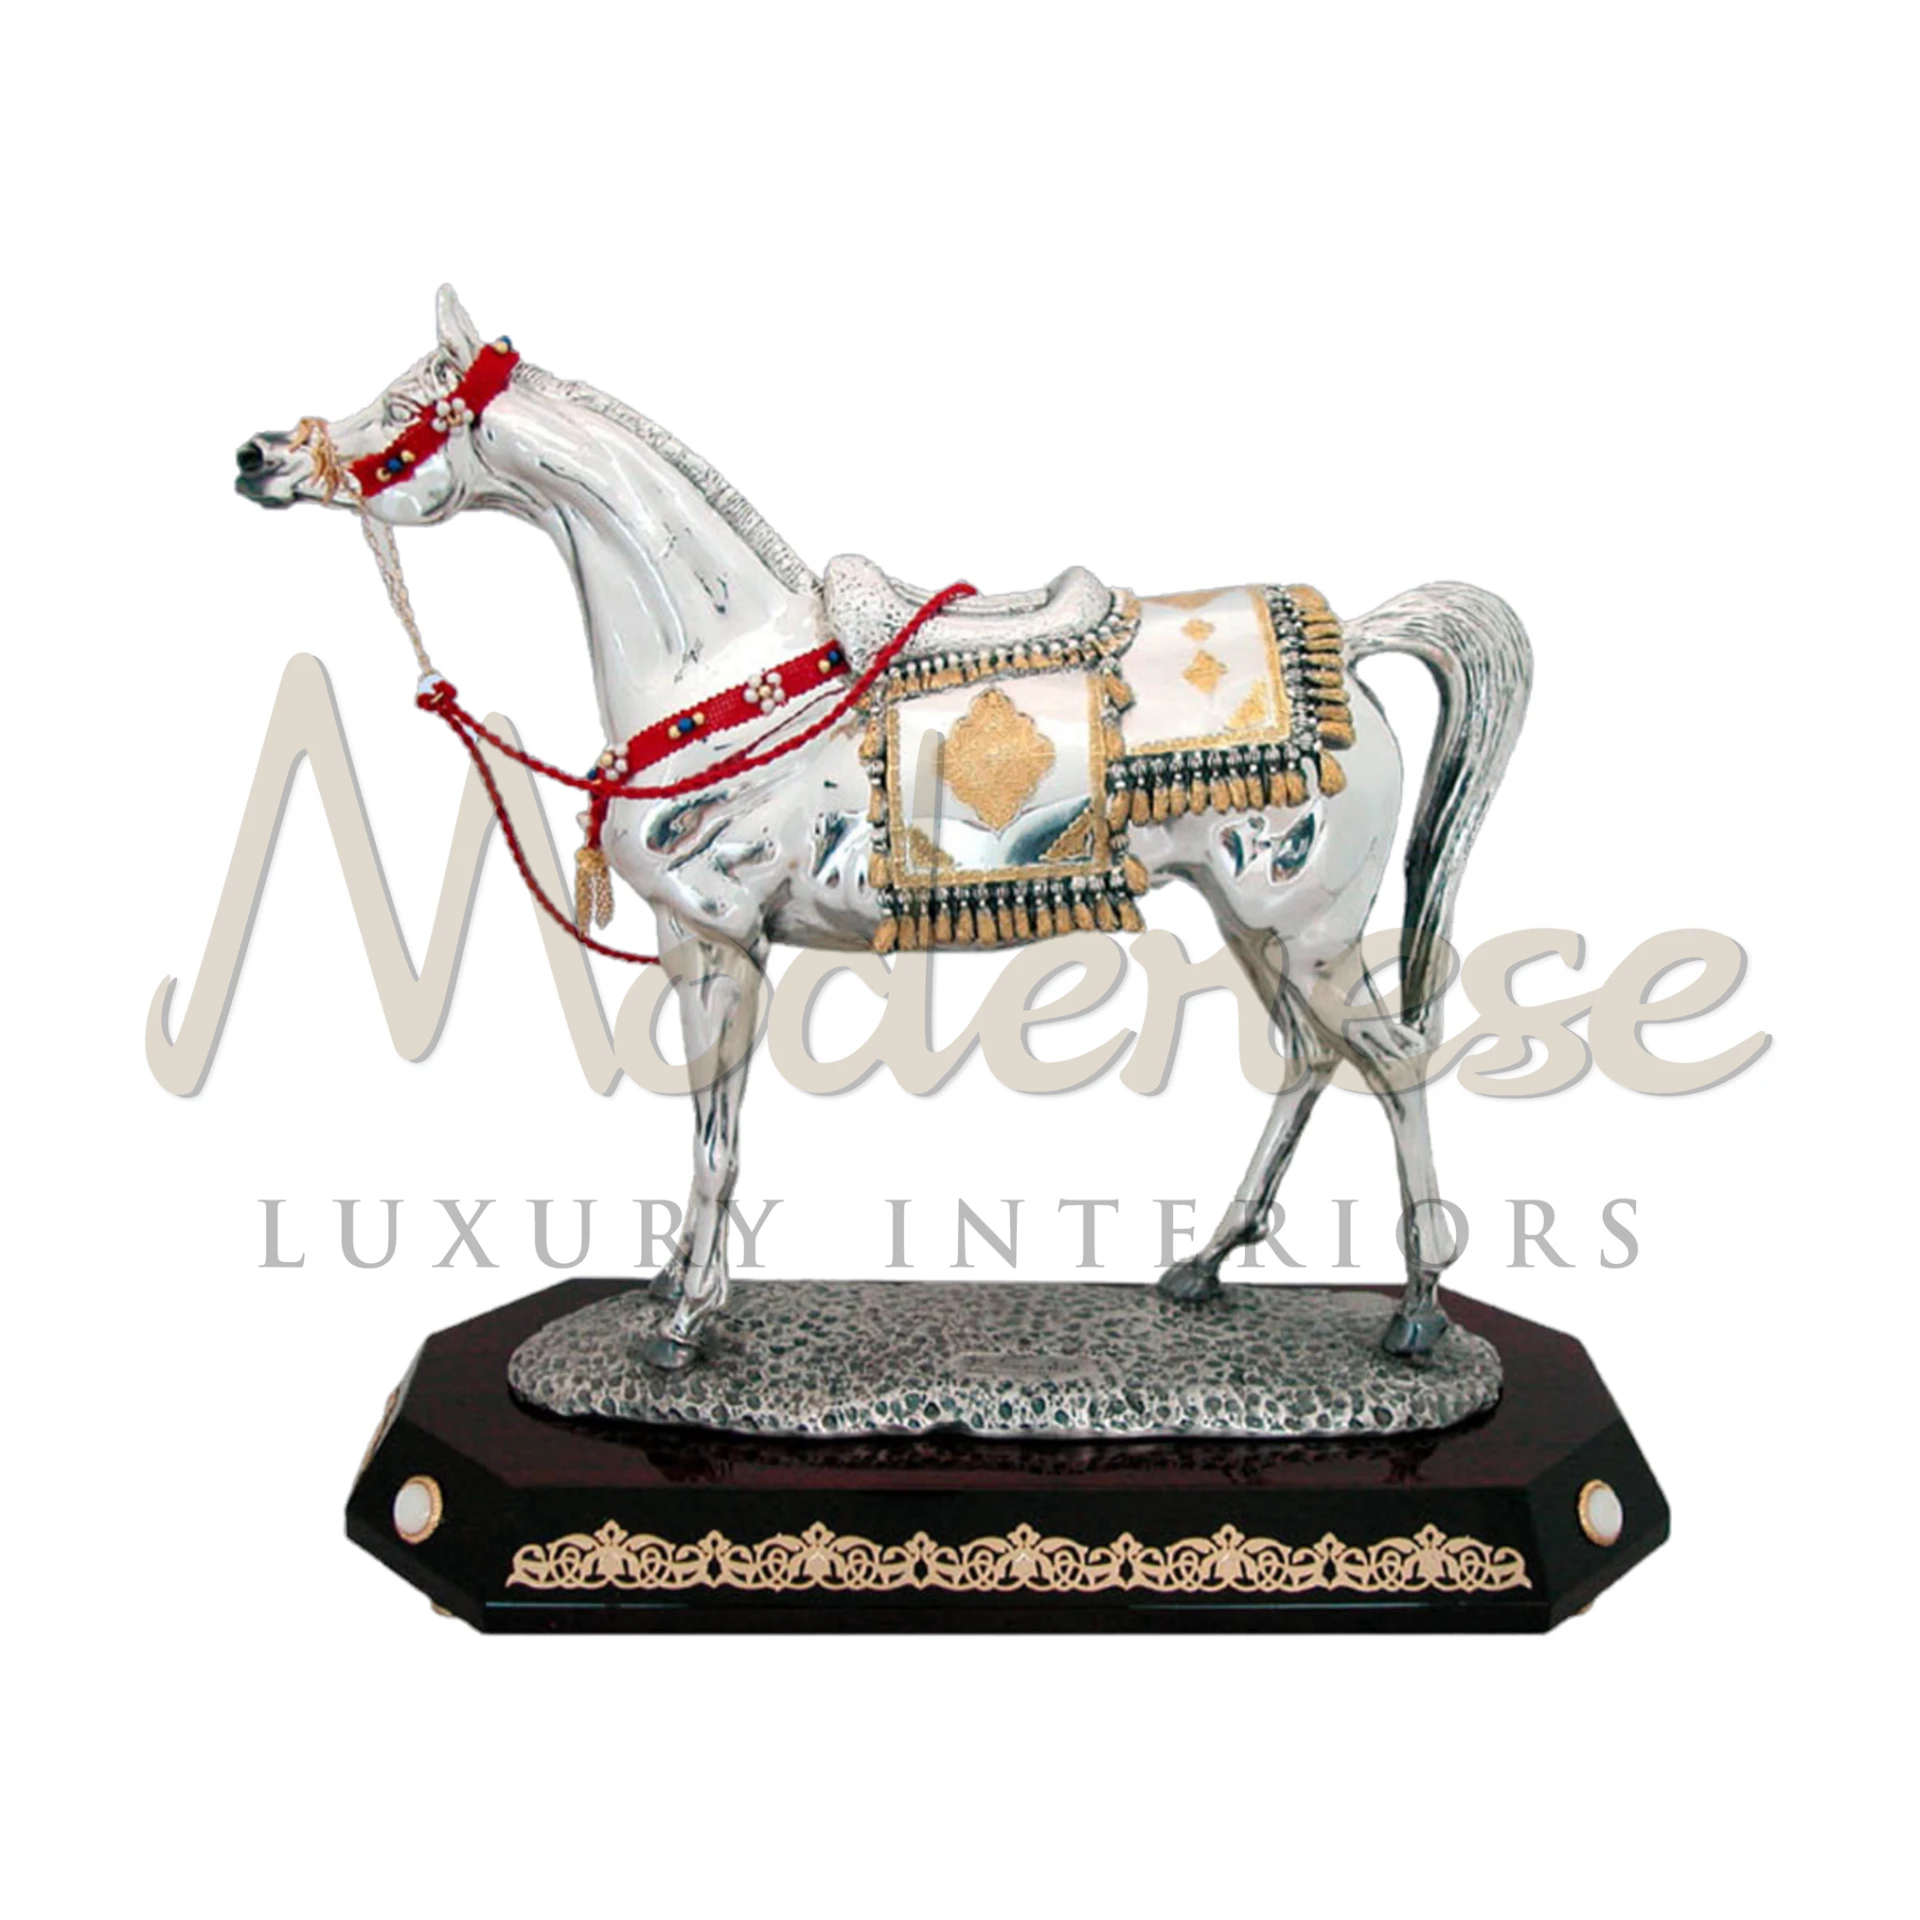 Designer Horse statuette in dynamic poses, showcasing intricate craftsmanship, ideal for enhancing luxury interior décor with a touch of elegance.